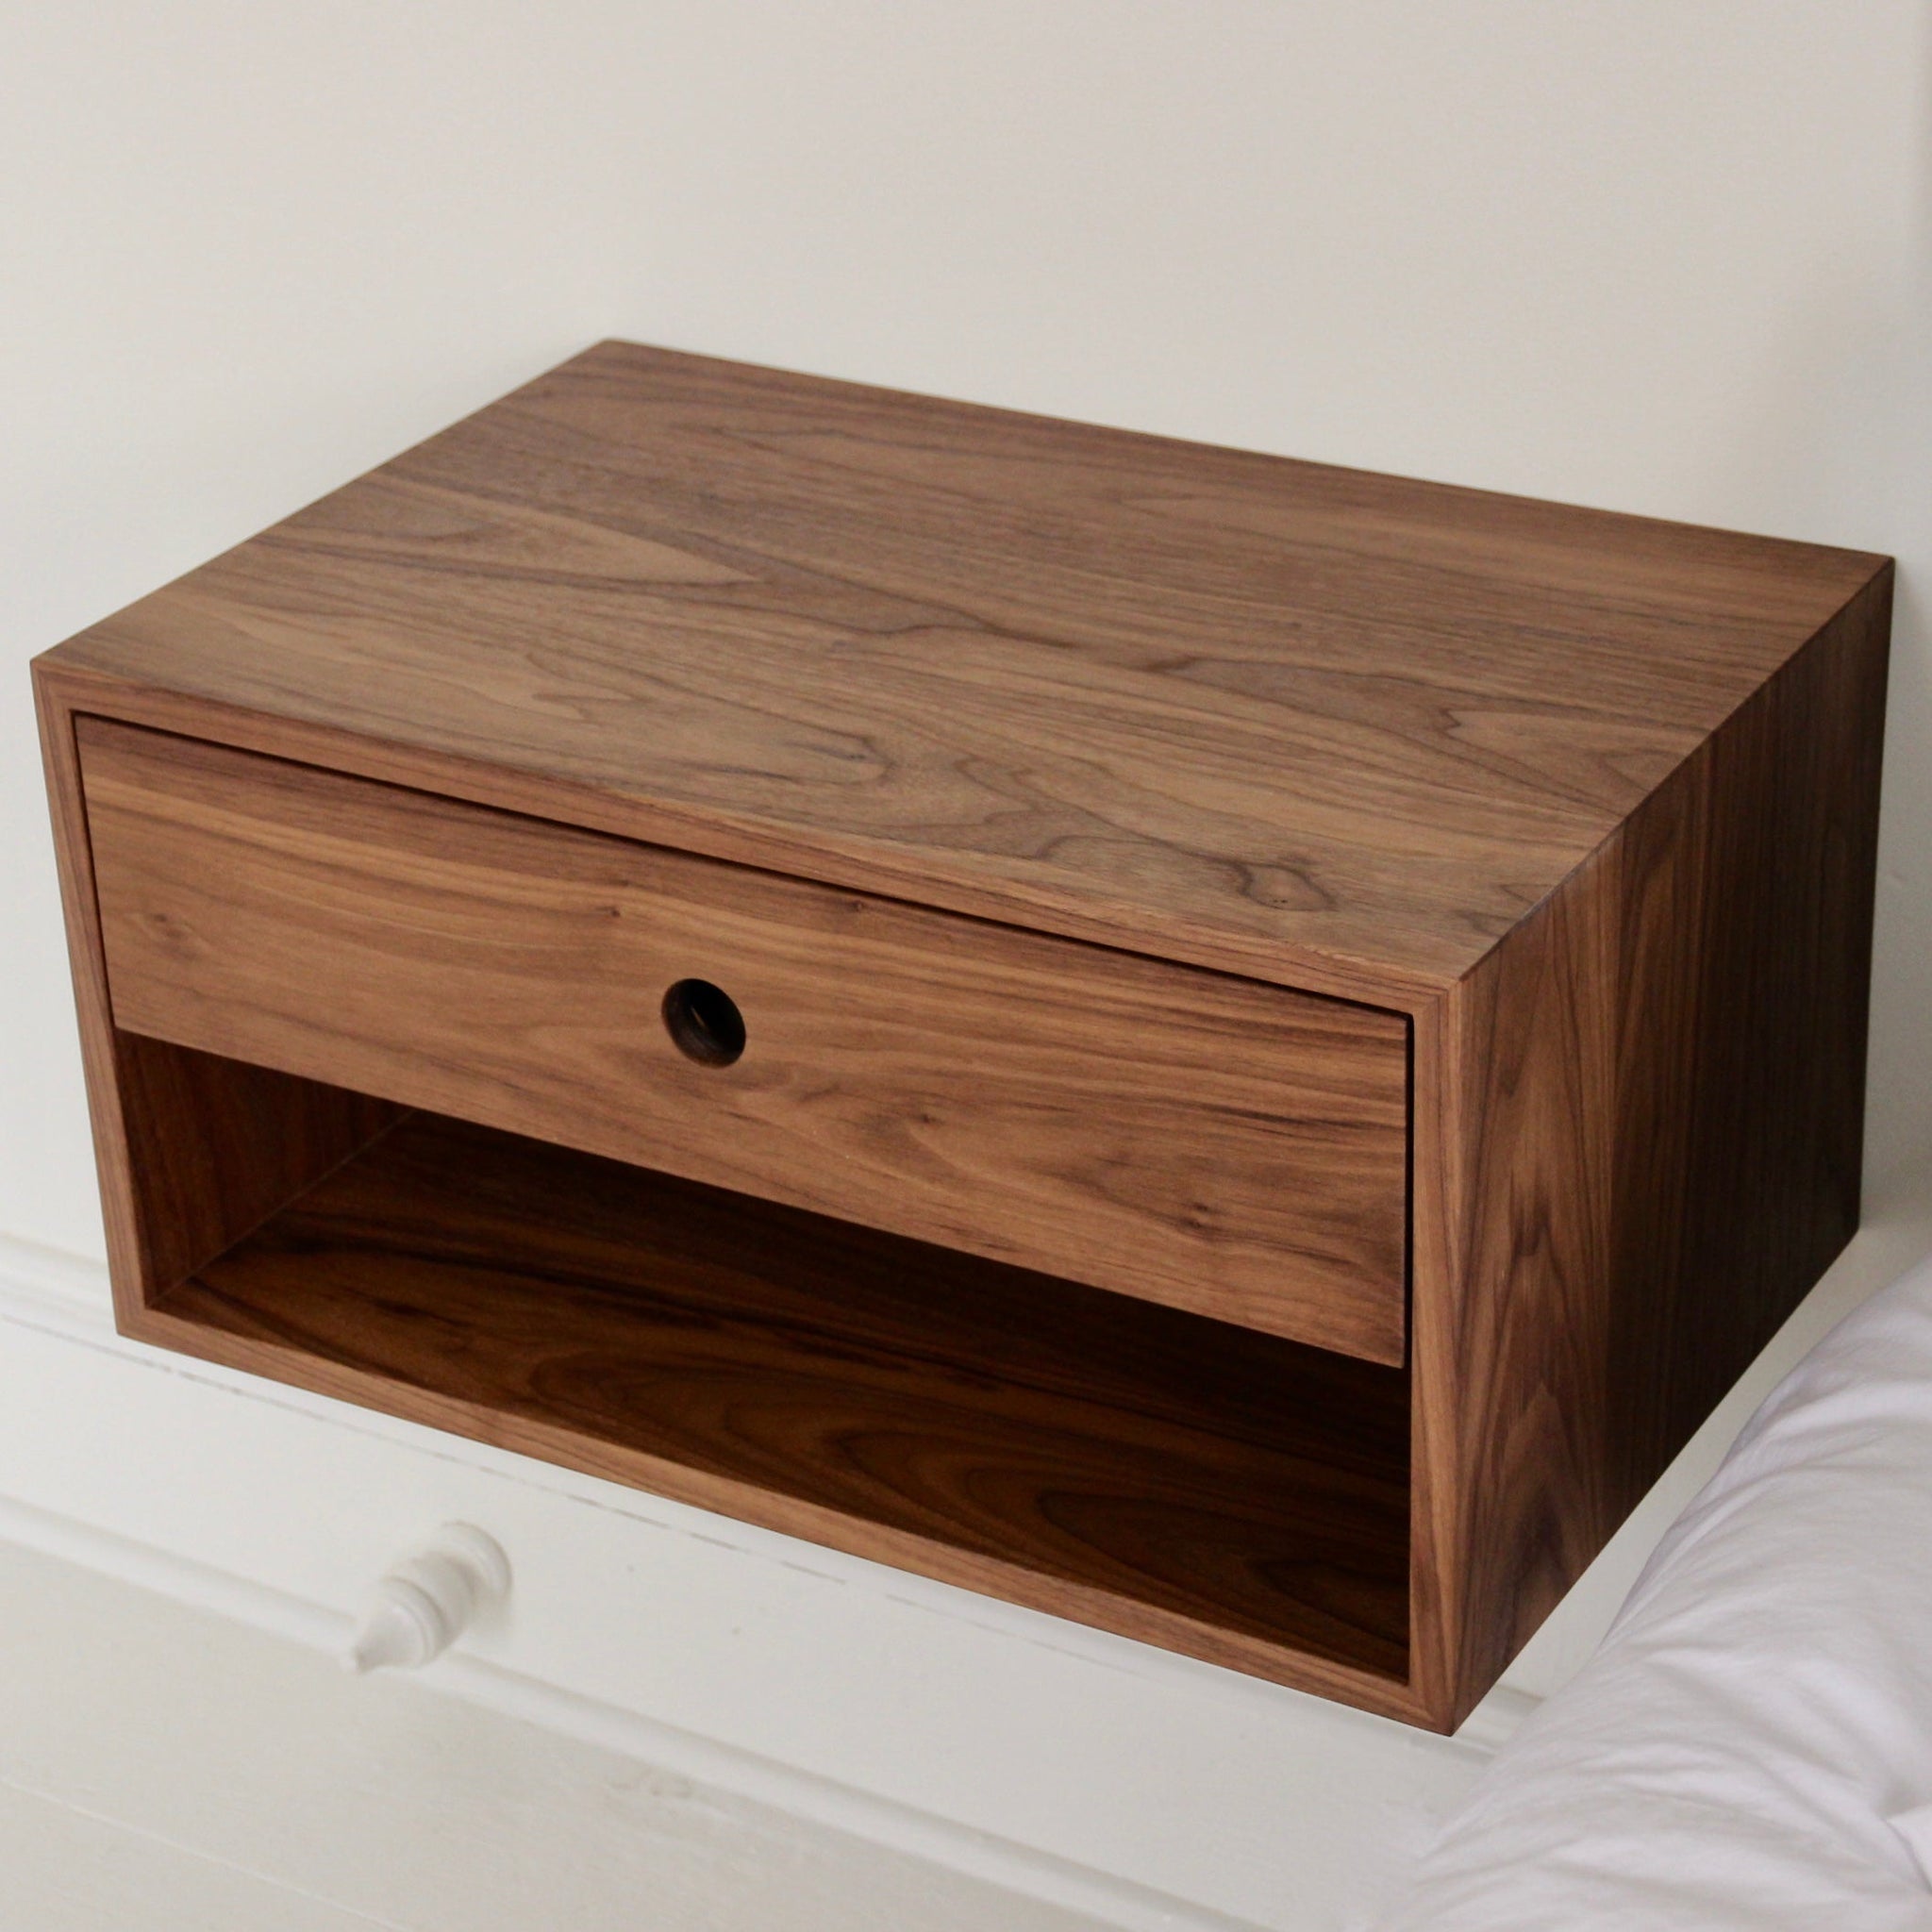 Double Tall Floating Nightstand in Walnut - Krøvel Furniture Co. Handmade in Maine